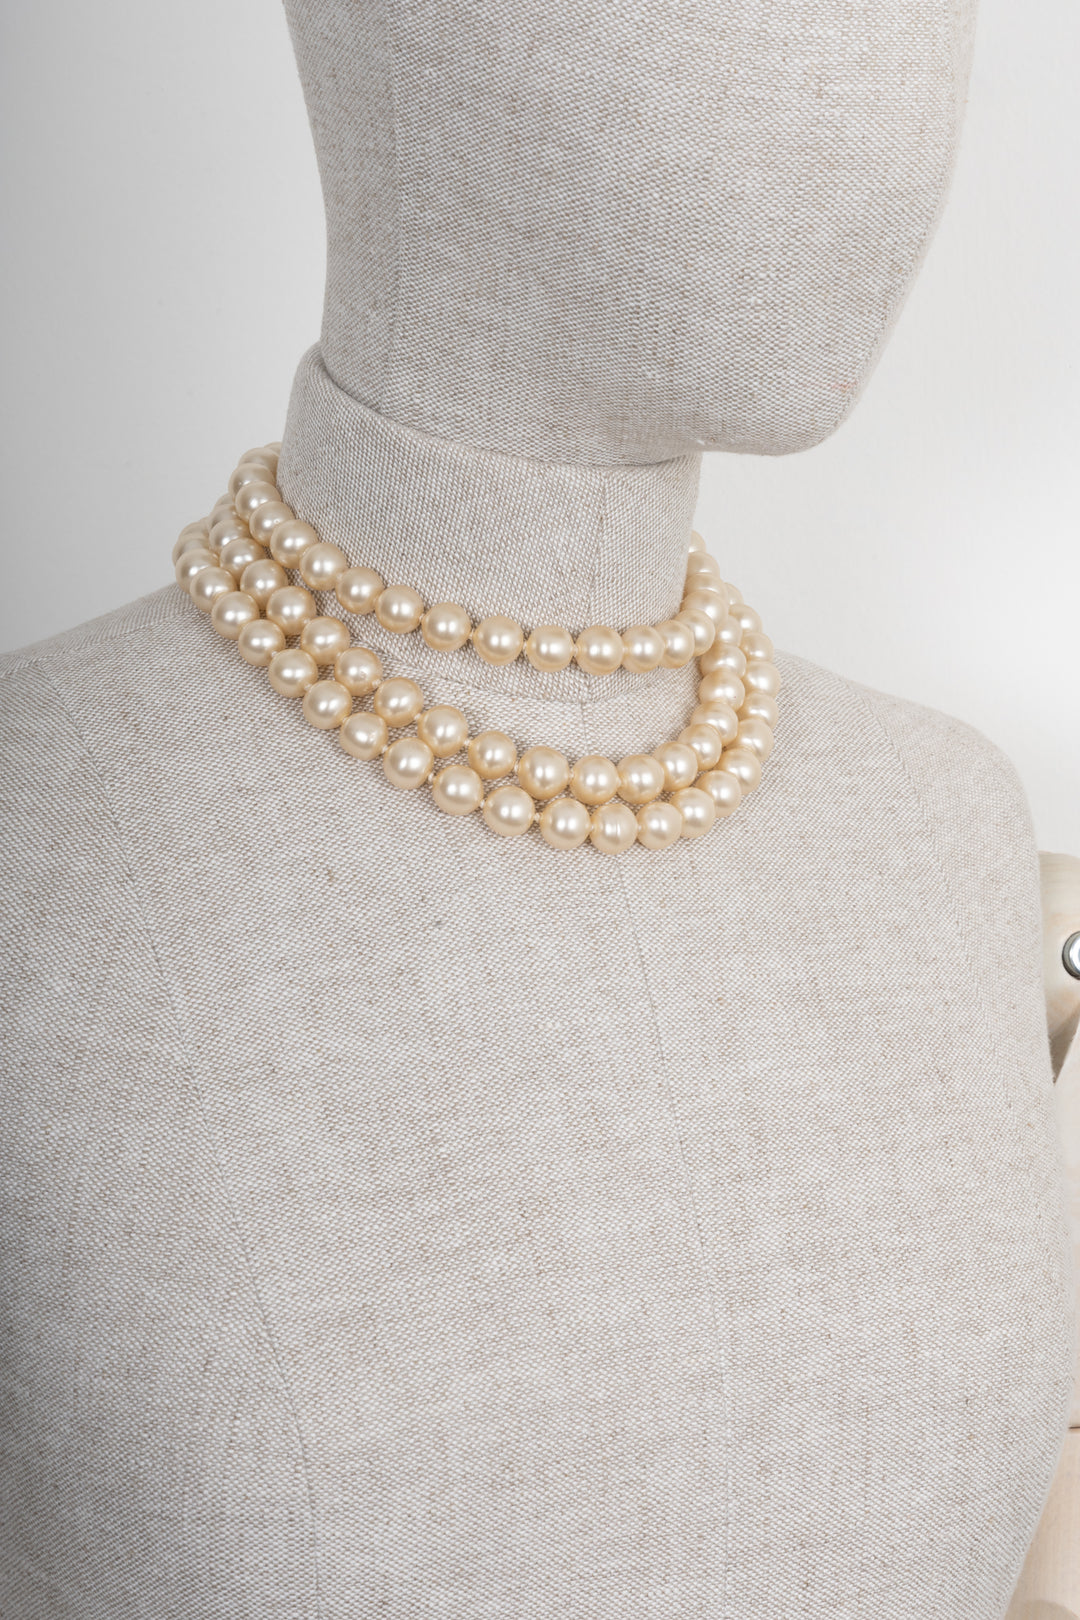 CHANEL Double Pearl Necklace